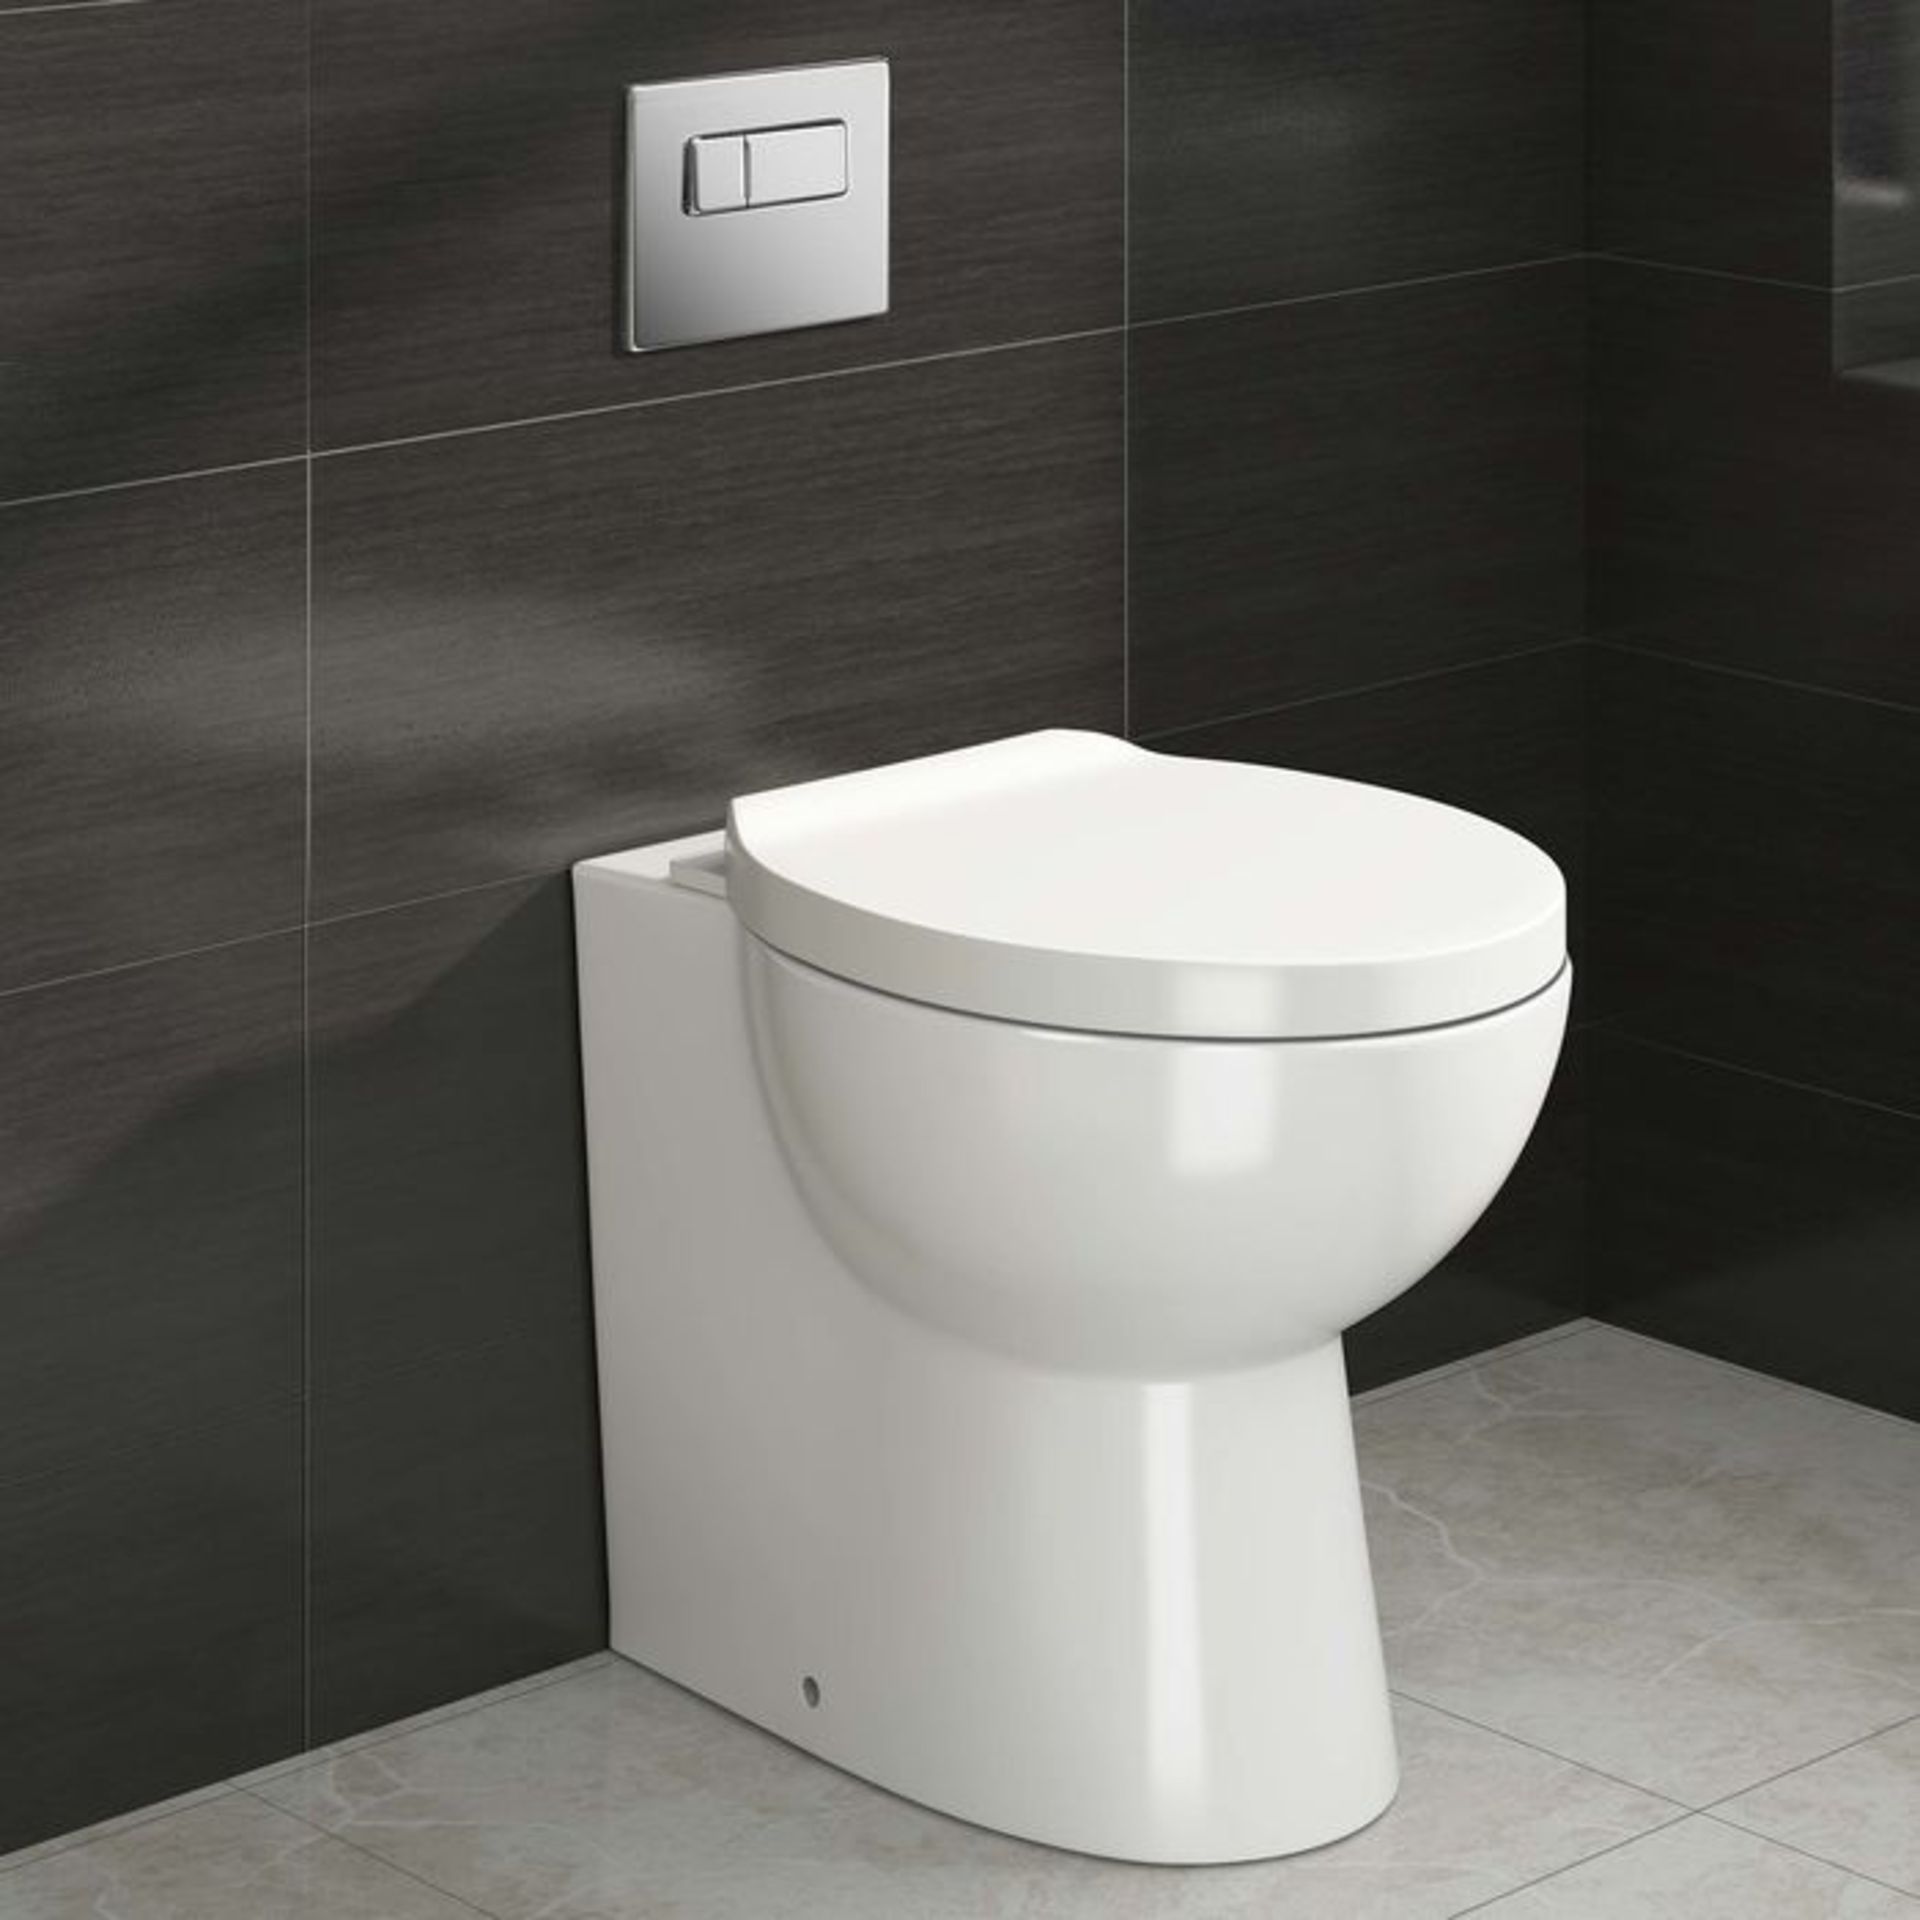 (SP47) Quartz Back to Wall Toilet inc Soft Close Seat Made from White Vitreous China Finished in a - Image 2 of 4